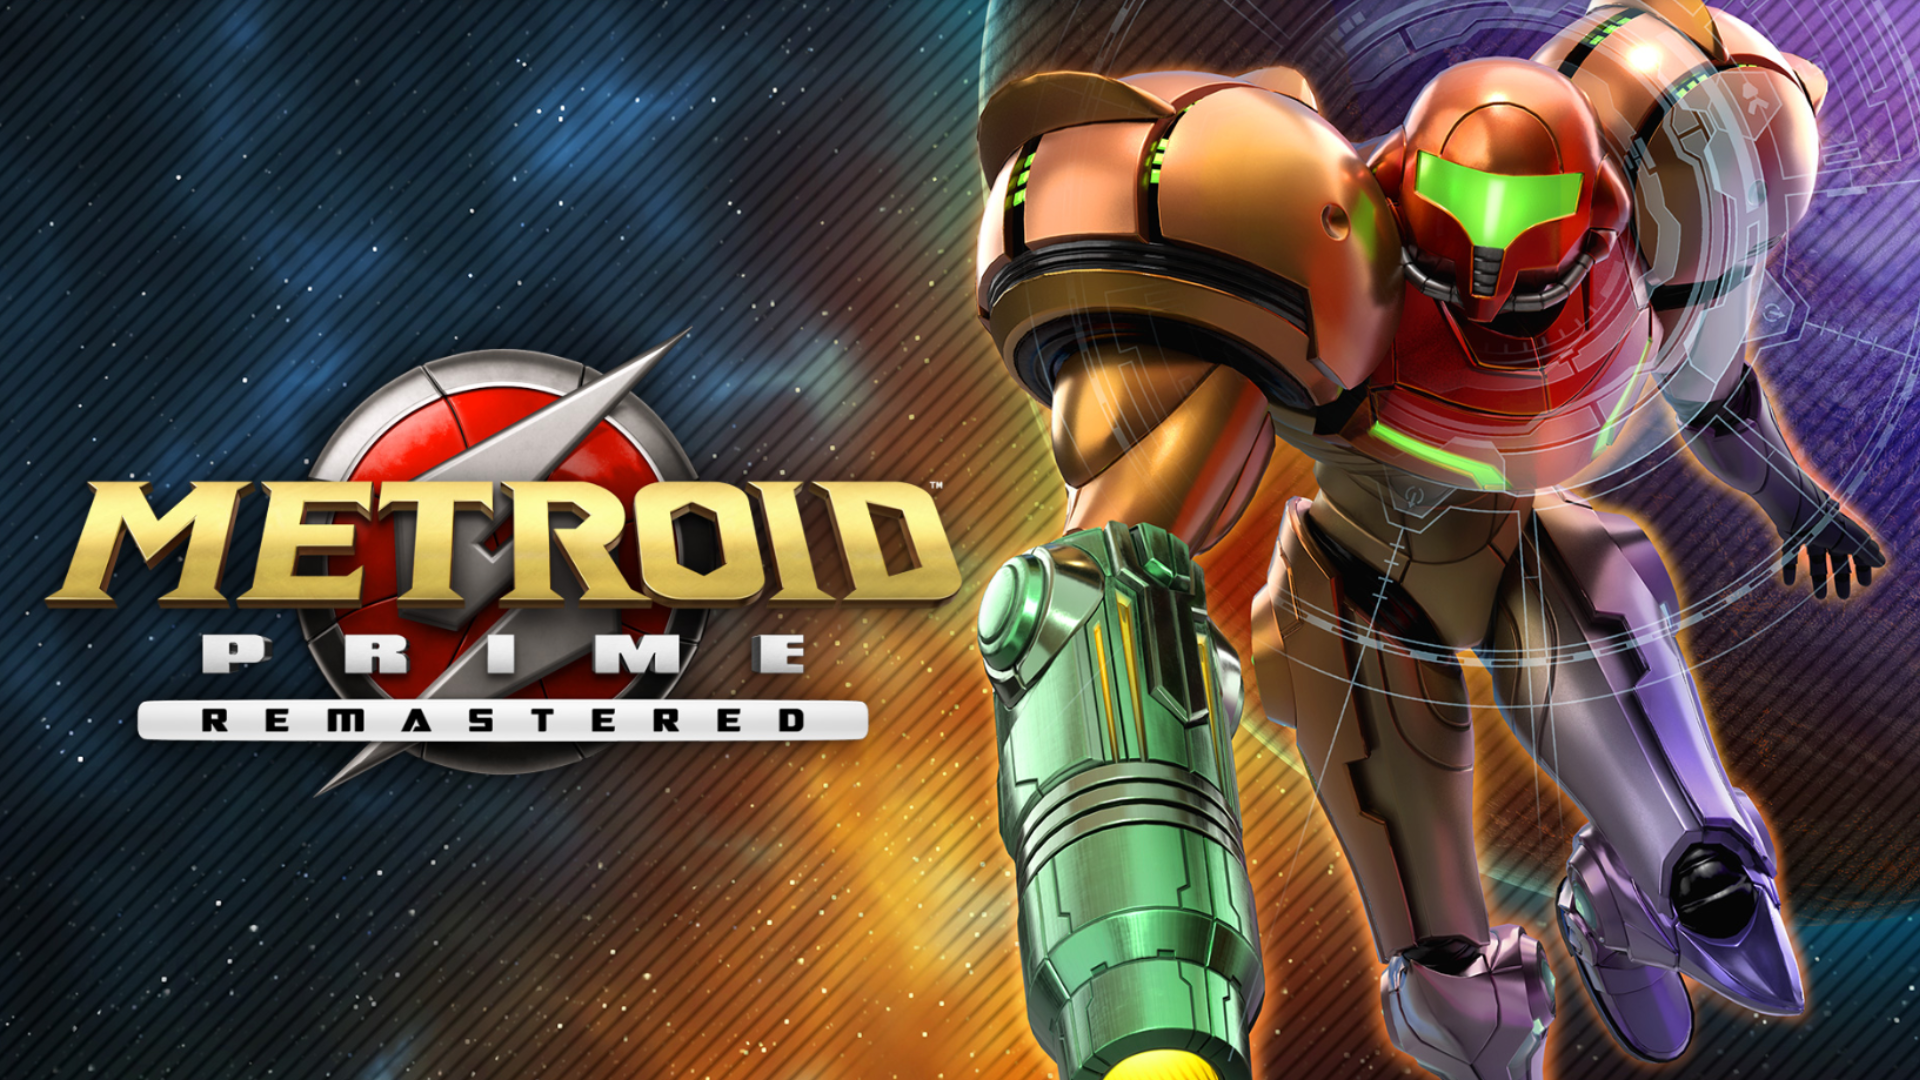 A high-definition image from "Metroid Prime Remastered" showing the protagonist, Samus Aran, in her iconic Power Suit against a vibrant, dynamic background. The game's logo is prominently displayed beside her.